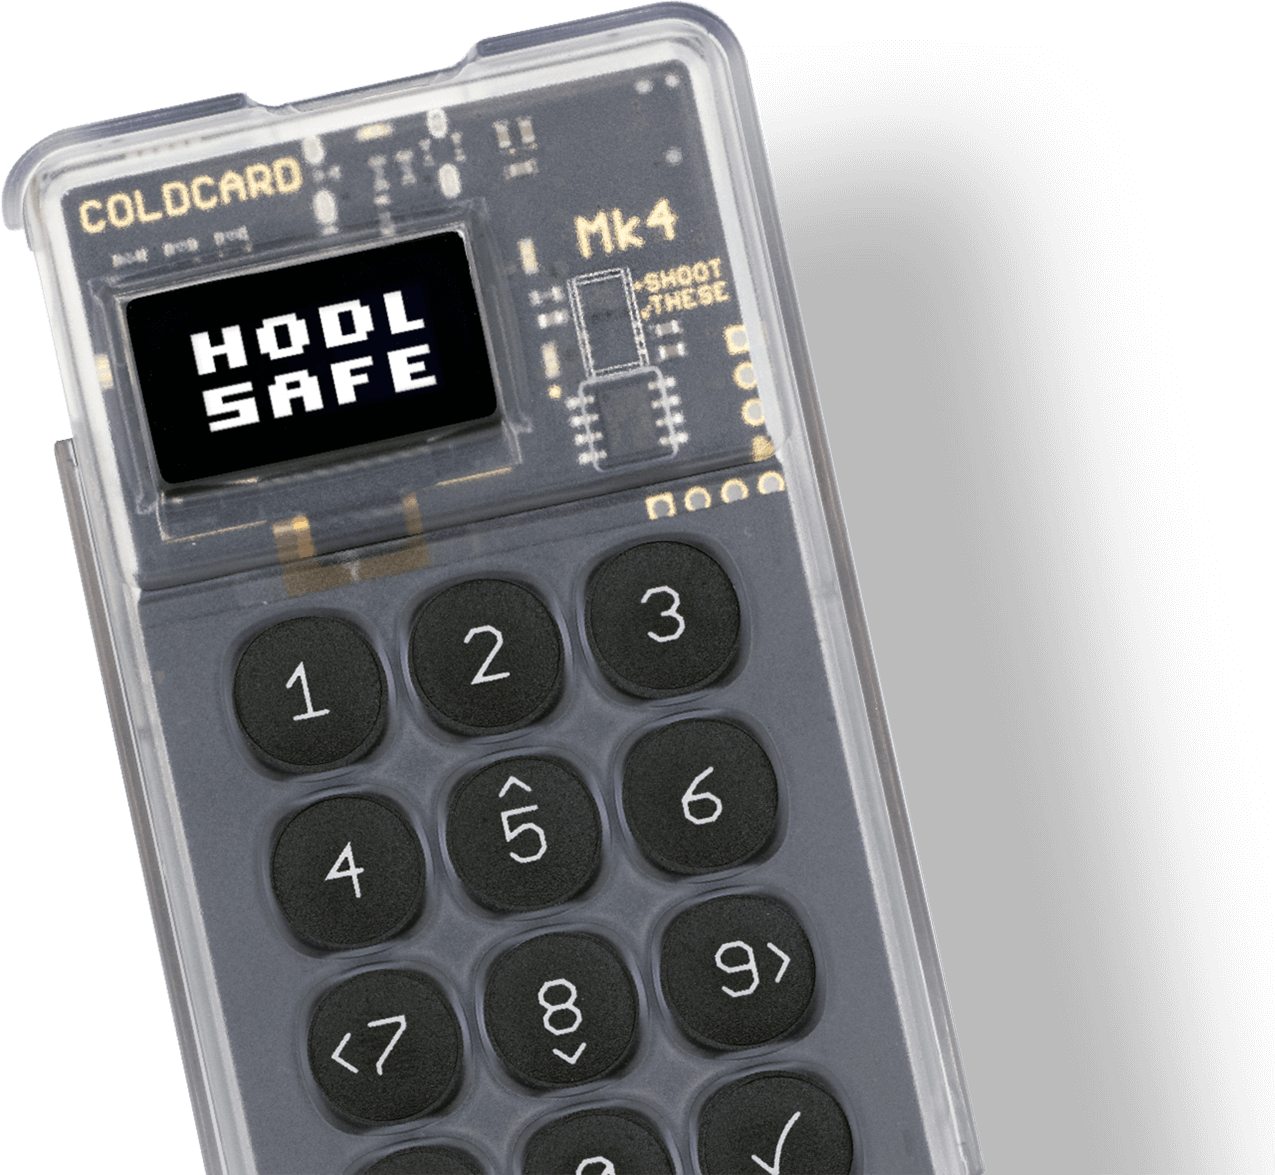 COLDCARD – Hardware Wallet - The Most Trusted and Secure Signing Device  (aka. Hardware Wallet)